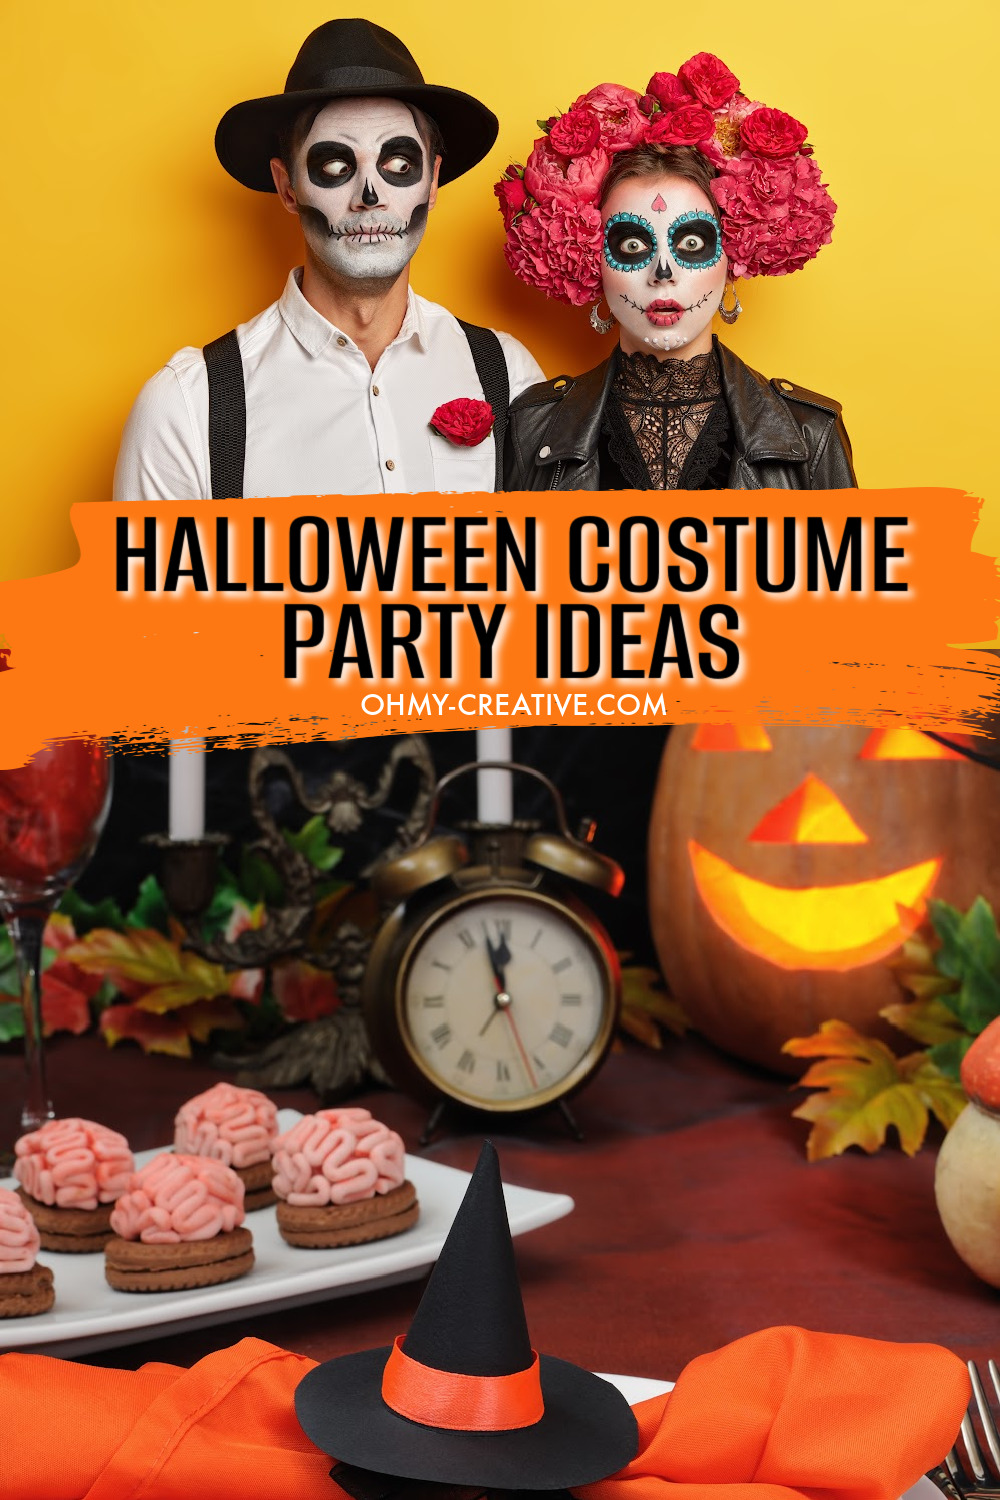 Halloween costume party ideas including a couple dressed in Day of the Dead costumes and a Halloween party food table decorated with pumpkins and witches hat including brain cupcakes.